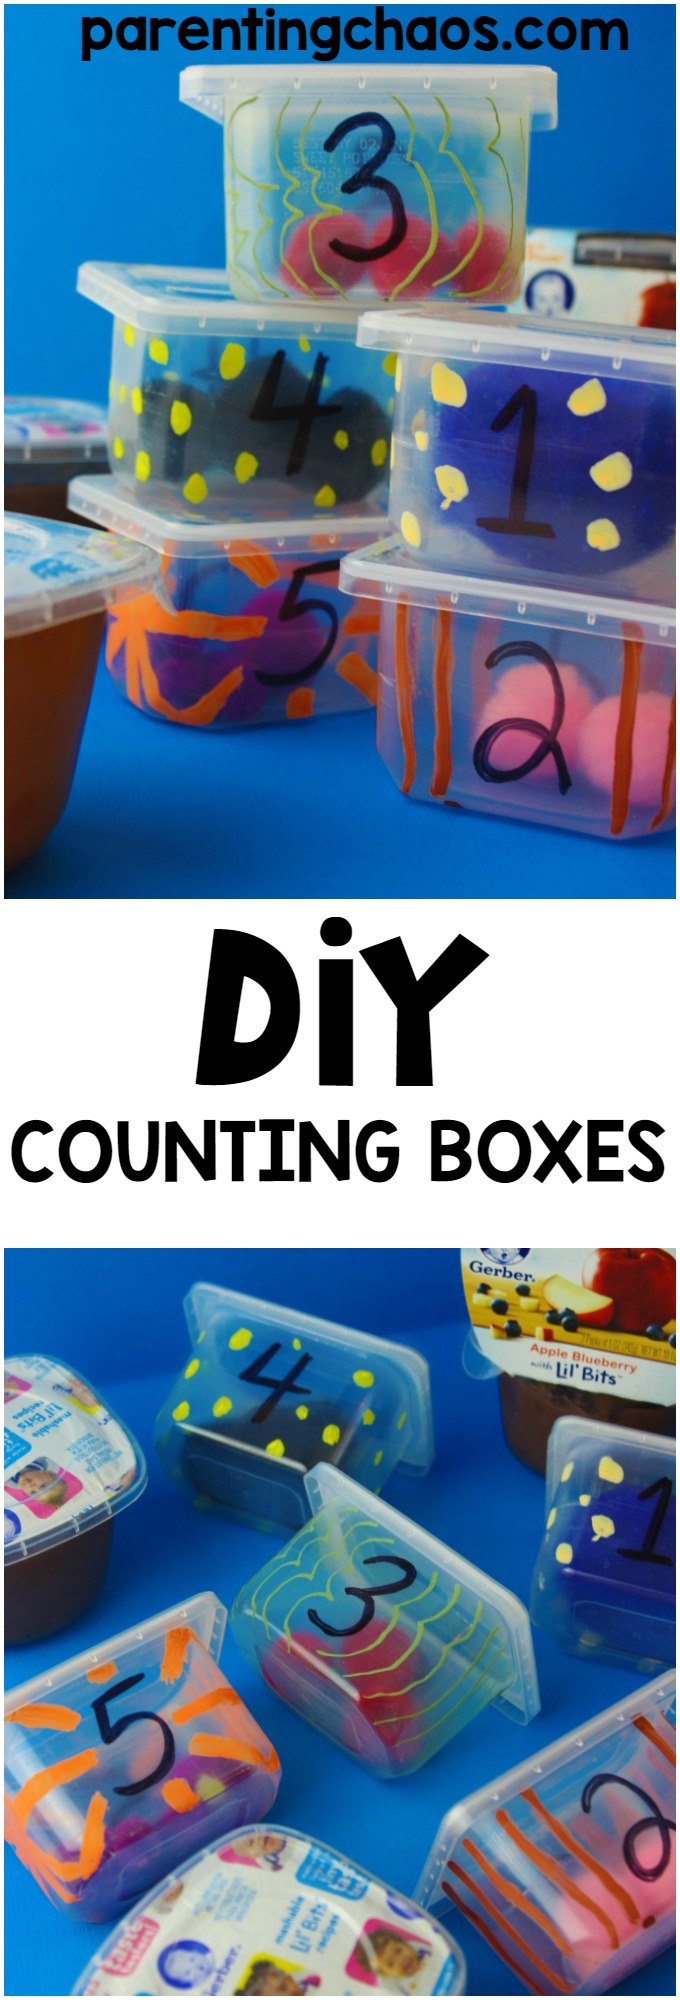 30 Days 30 Ways to Connect with Kids DIY Counting Boxes Day 16